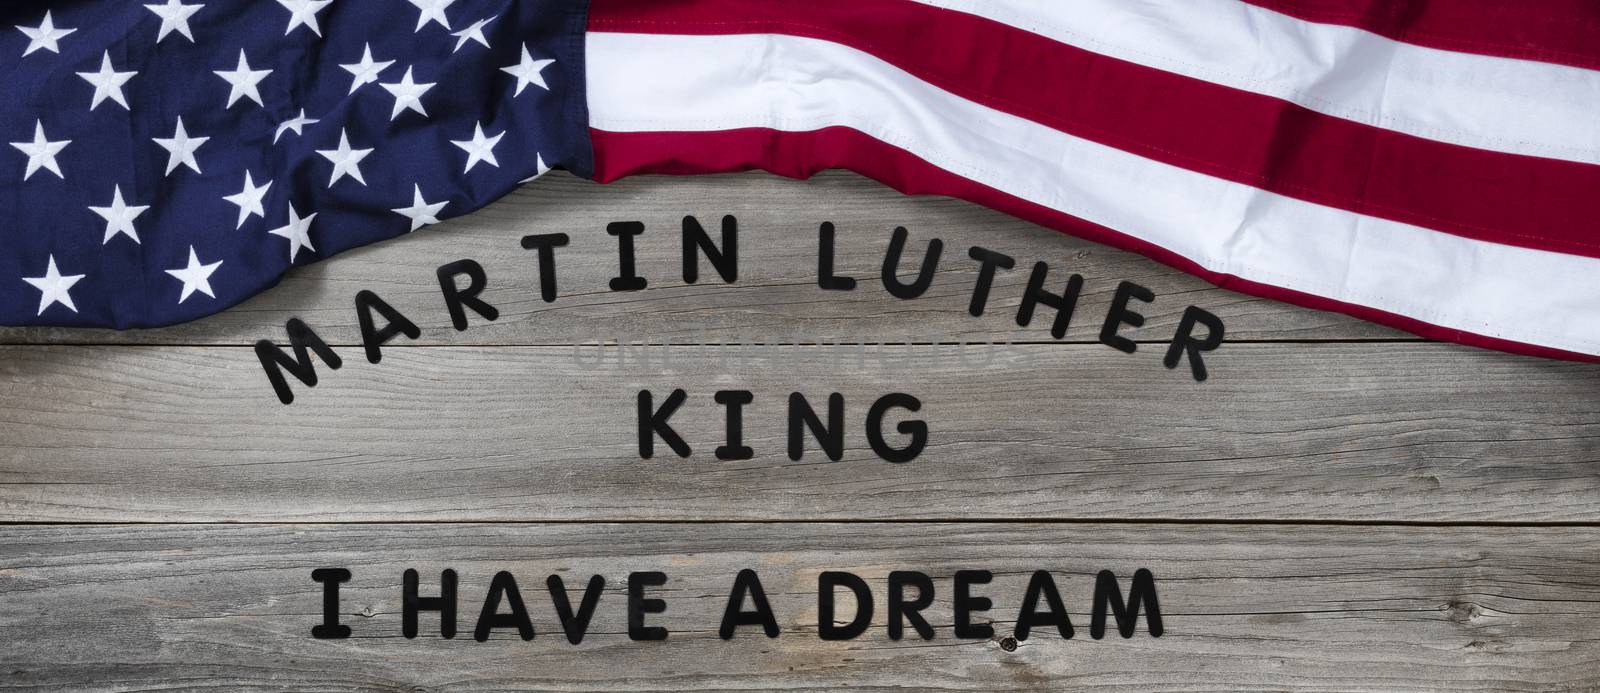 Martin Luther King JR Day background with text wording